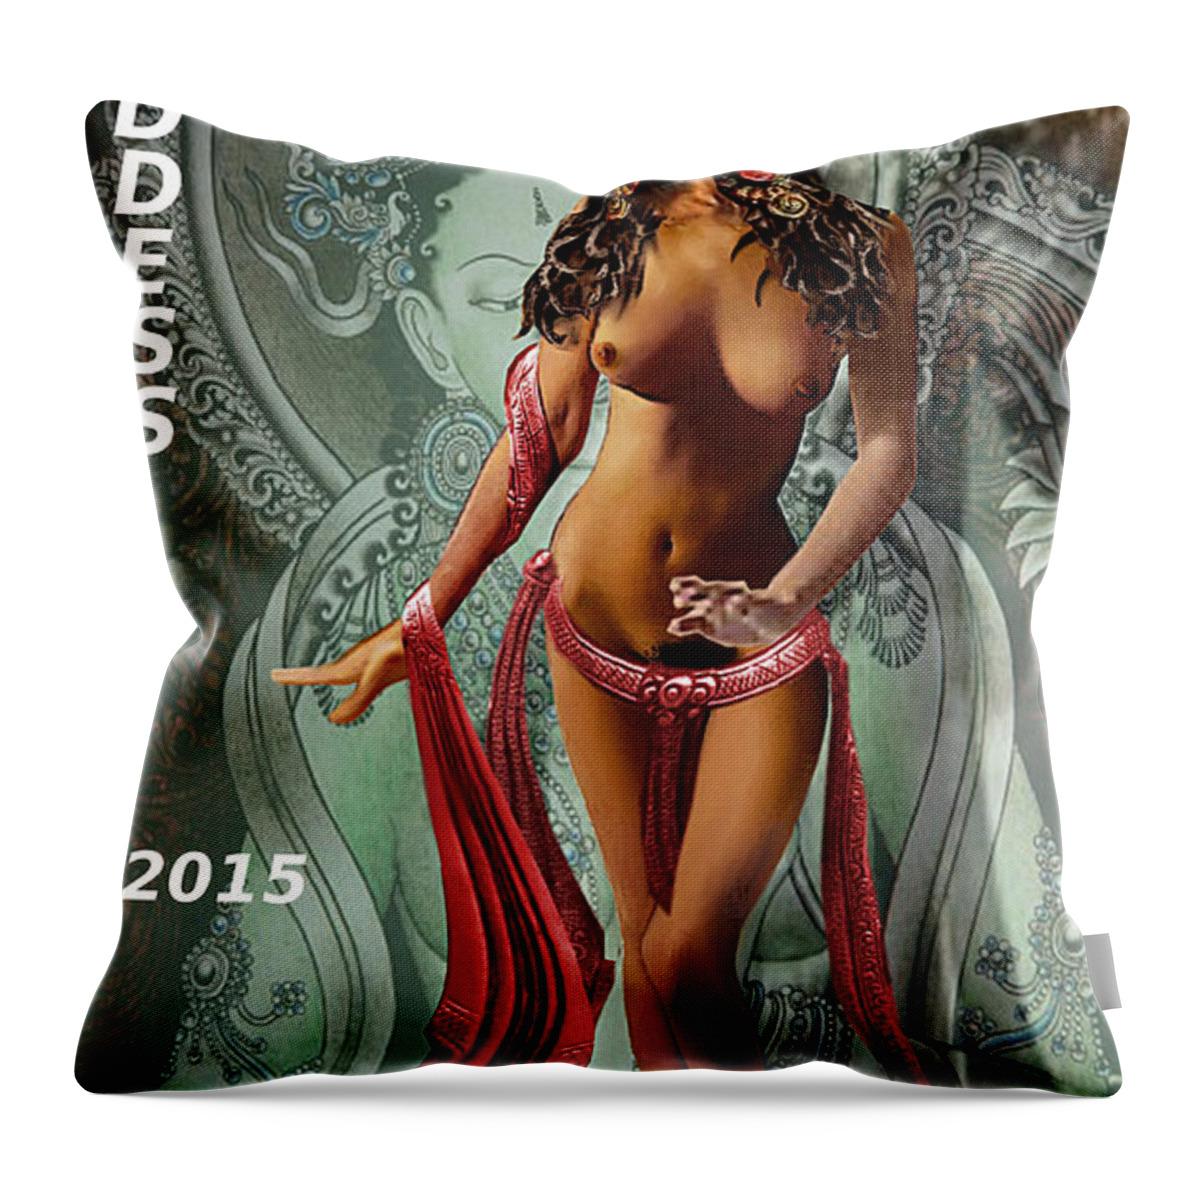 Fine Throw Pillow featuring the painting Original Female Nude Jean Goddess as Tara Dancing Poster by G Linsenmayer